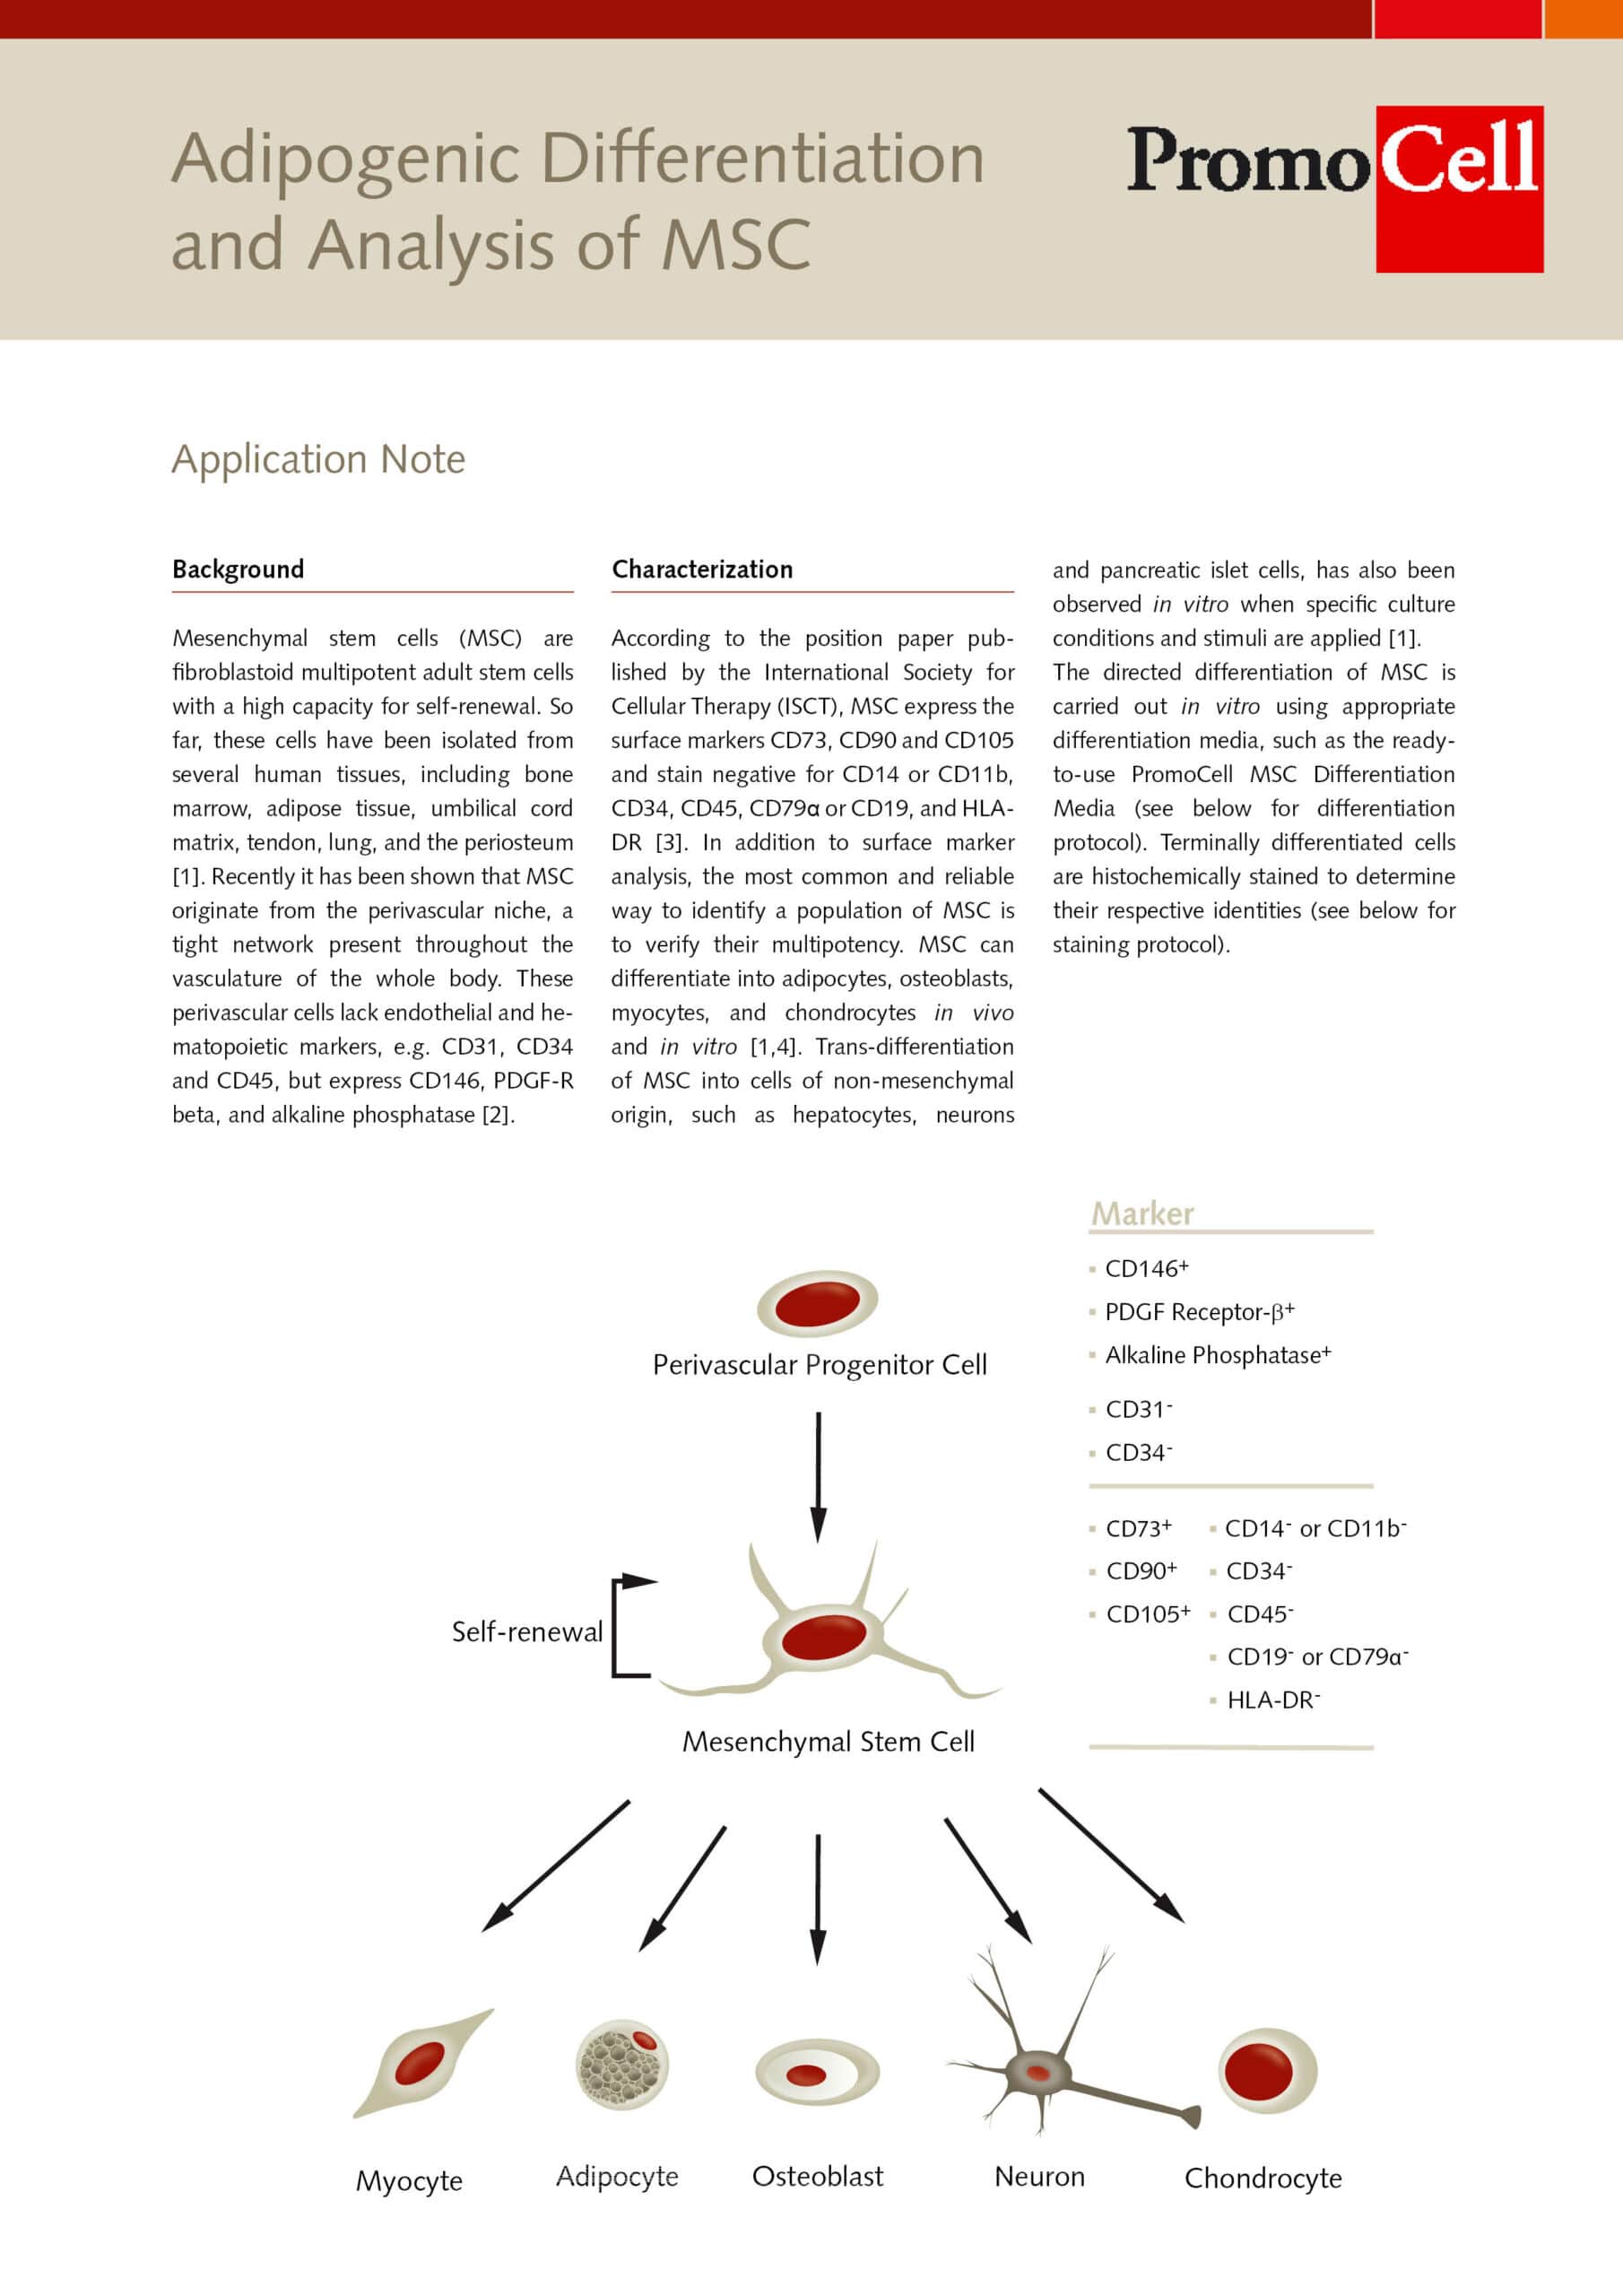 AppNote_Adipogenic-Differentiation-and-Analysis-of-MSC_Thumbnail